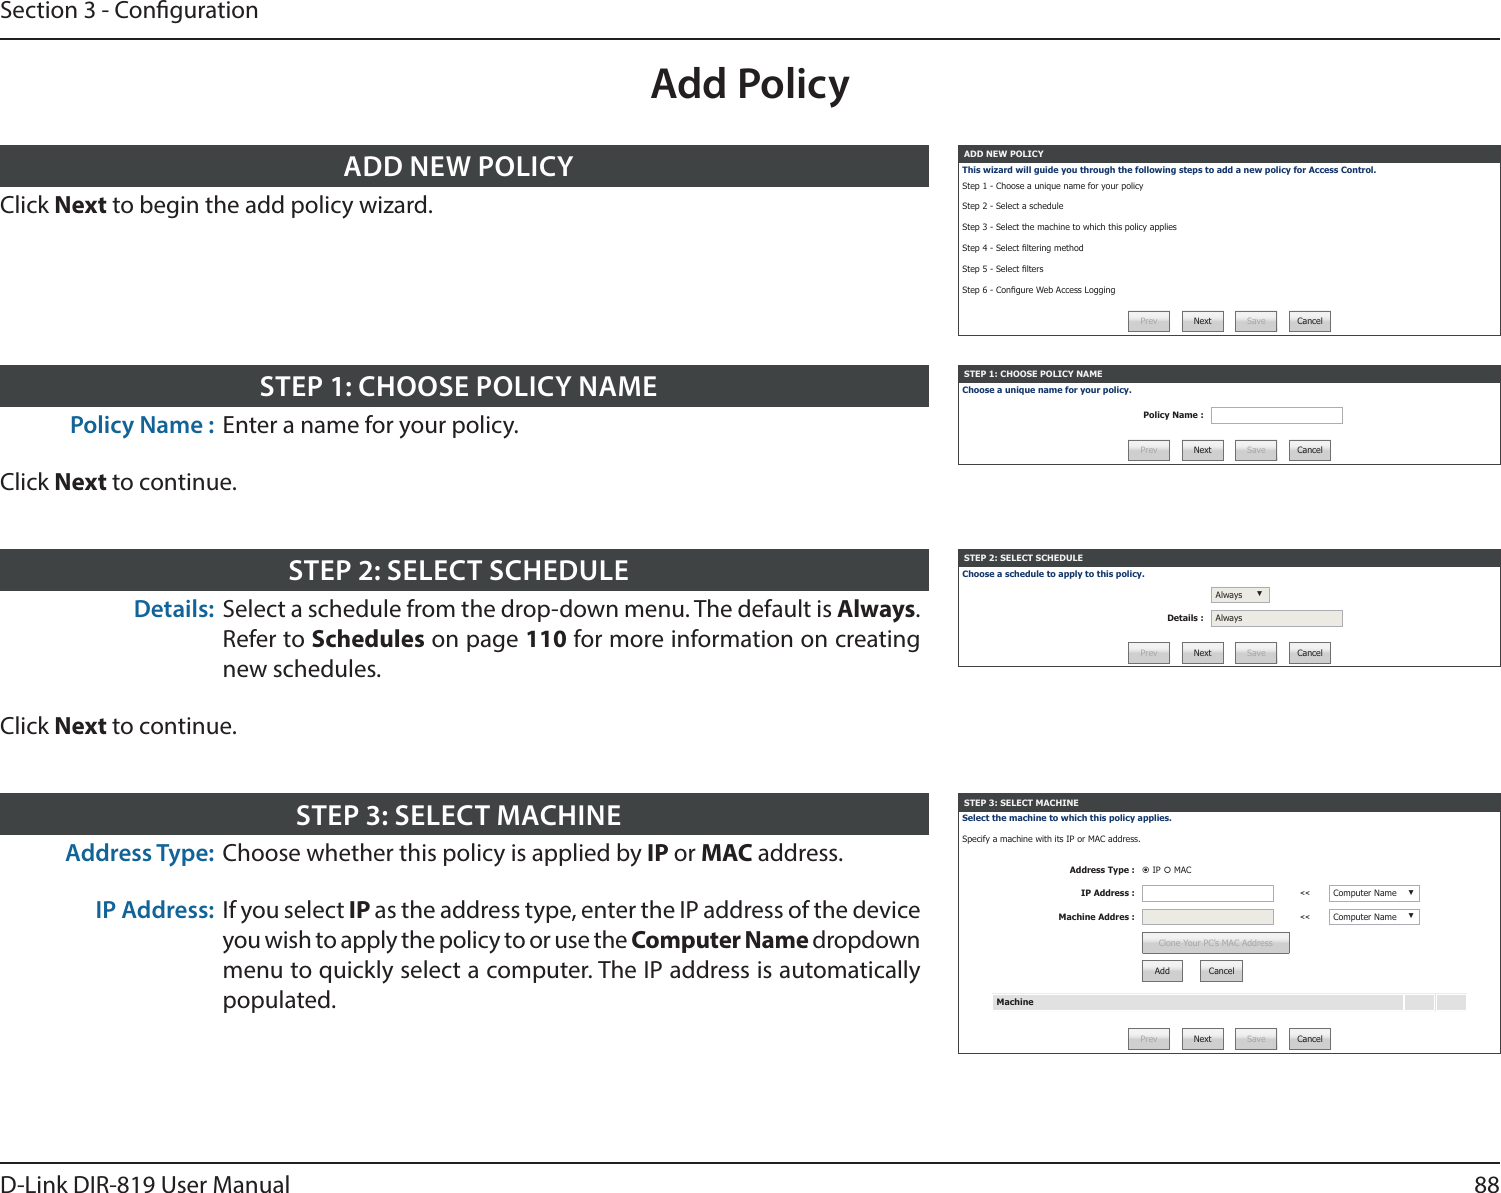 88D-Link DIR-819 User ManualSection 3 - CongurationAdd PolicyADD NEW POLICYThis wizard will guide you through the following steps to add a new policy for Access Control.Step 1 - Choose a unique name for your policy Step 2 - Select a scheduleStep 3 - Select the machine to which this policy appliesStep 4 - Select ltering methodStep 5 - Select ltersStep 6 - Congure Web Access LoggingPrev Next Save CancelClick Next to begin the add policy wizard.ADD NEW POLICYSTEP 1: CHOOSE POLICY NAMEChoose a unique name for your policy.Policy Name :Prev Next Save CancelPolicy Name : Enter a name for your policy.Click Next to continue.STEP 1: CHOOSE POLICY NAMESTEP 2: SELECT SCHEDULEChoose a schedule to apply to this policy.Always ▼Details : AlwaysPrev Next Save CancelDetails: Select a schedule from the drop-down menu. The default is Always. Refer to Schedules on page 110 for more information on creating new schedules.Click Next to continue.STEP 2: SELECT SCHEDULESTEP 3: SELECT MACHINESelect the machine to which this policy applies. Specify a machine with its IP or MAC address.Address Type :  IP  MACIP Address : &lt;&lt; Computer Name ▼Machine Addres : &lt;&lt; Computer Name ▼Clone Your PC’s MAC AddressAdd CancelMachinePrev Next Save CancelAddress Type: Choose whether this policy is applied by IP or MAC address.IP Address: If you select IP as the address type, enter the IP address of the device you wish to apply the policy to or use the Computer Name dropdown menu to quickly select a computer. The IP address is automatically populated.STEP 3: SELECT MACHINE